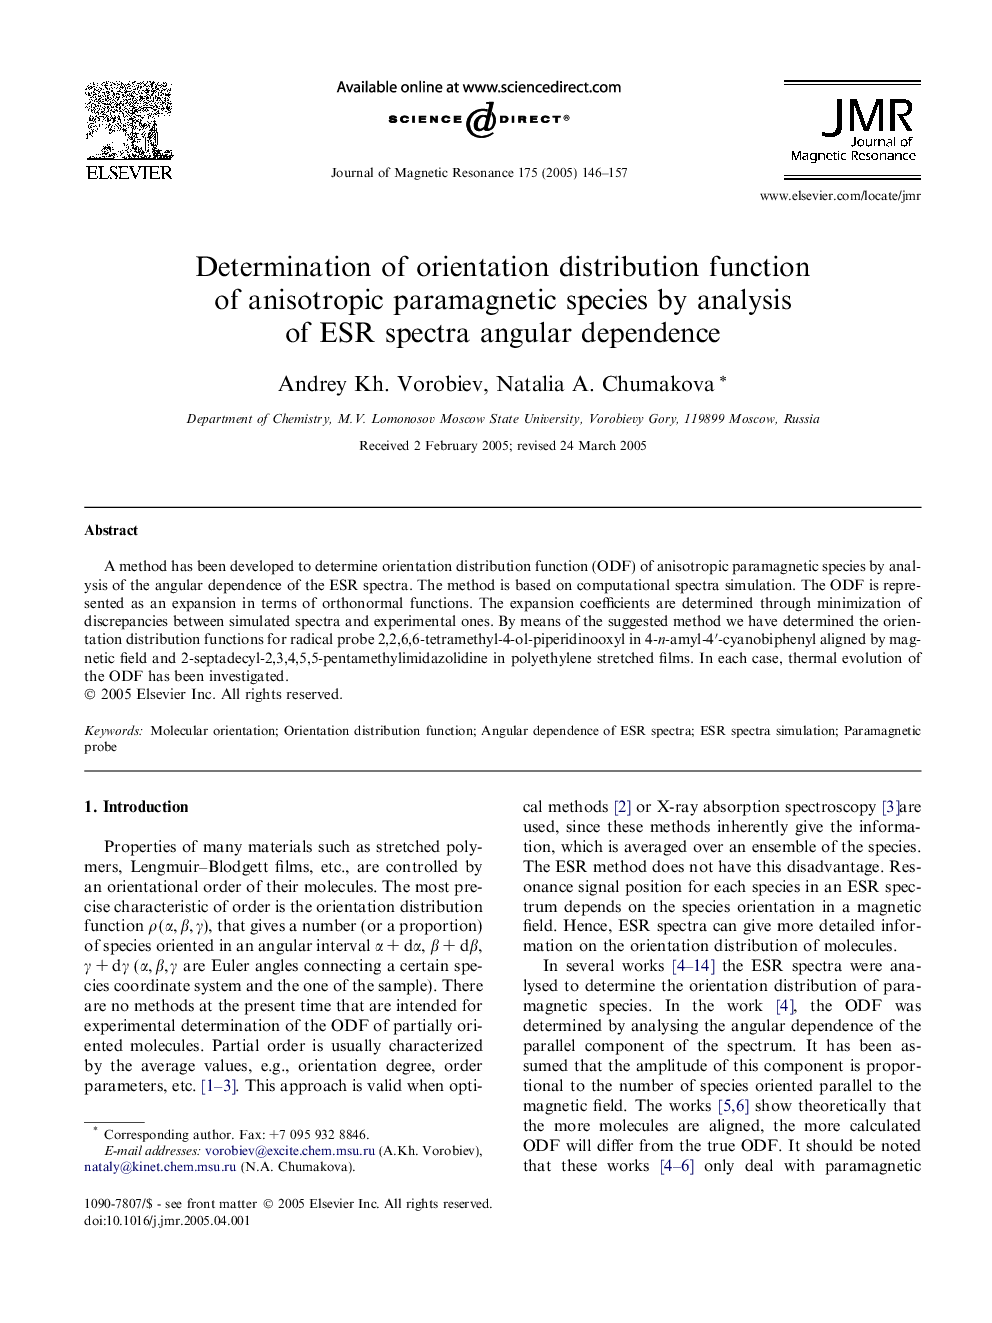 Determination of orientation distribution function of anisotropic paramagnetic species by analysis of ESR spectra angular dependence